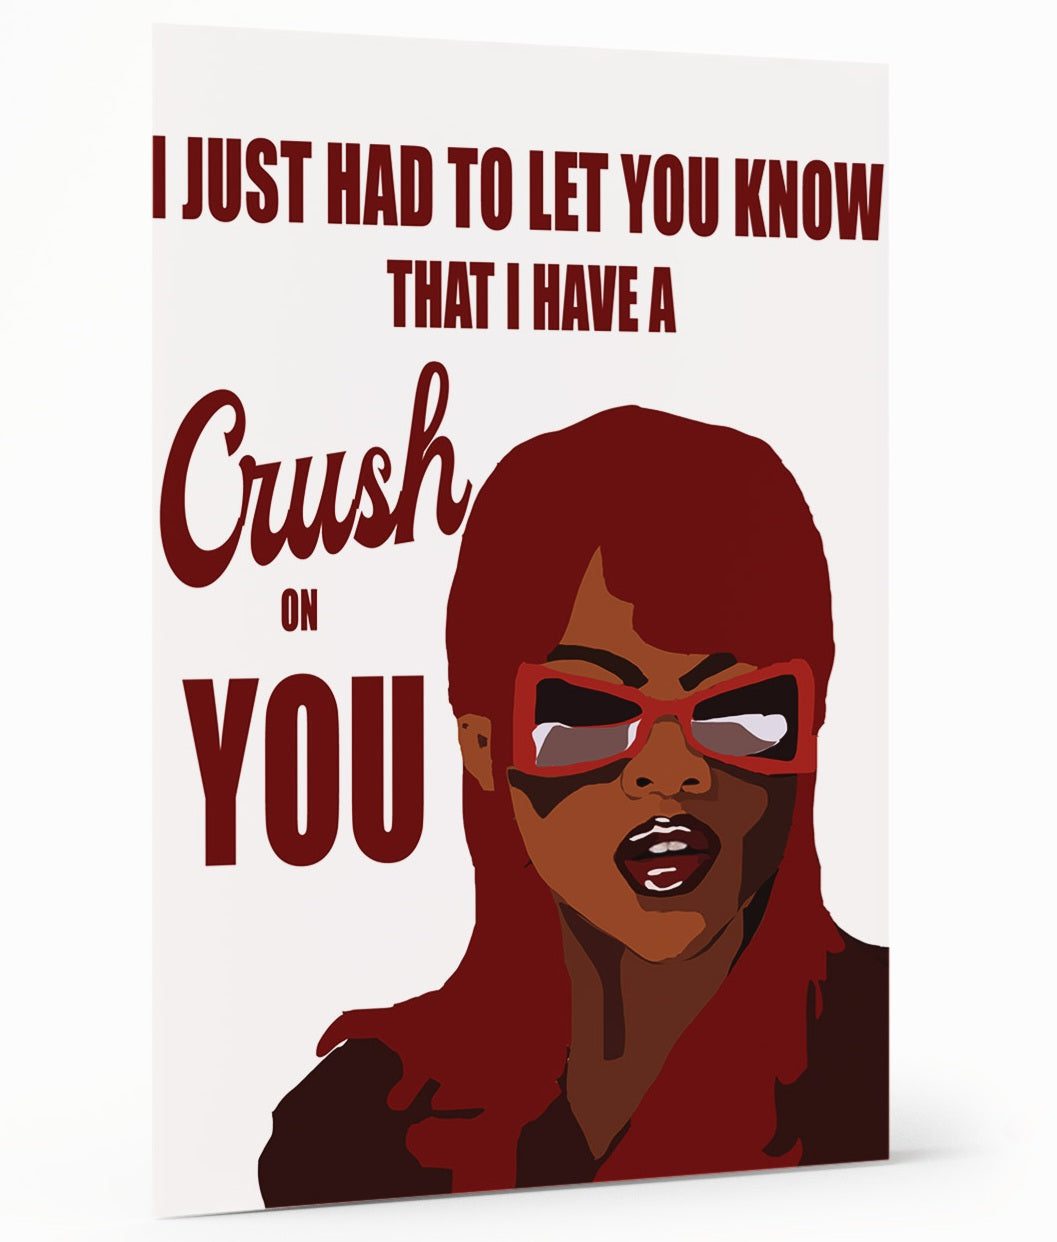 Crush On You Card